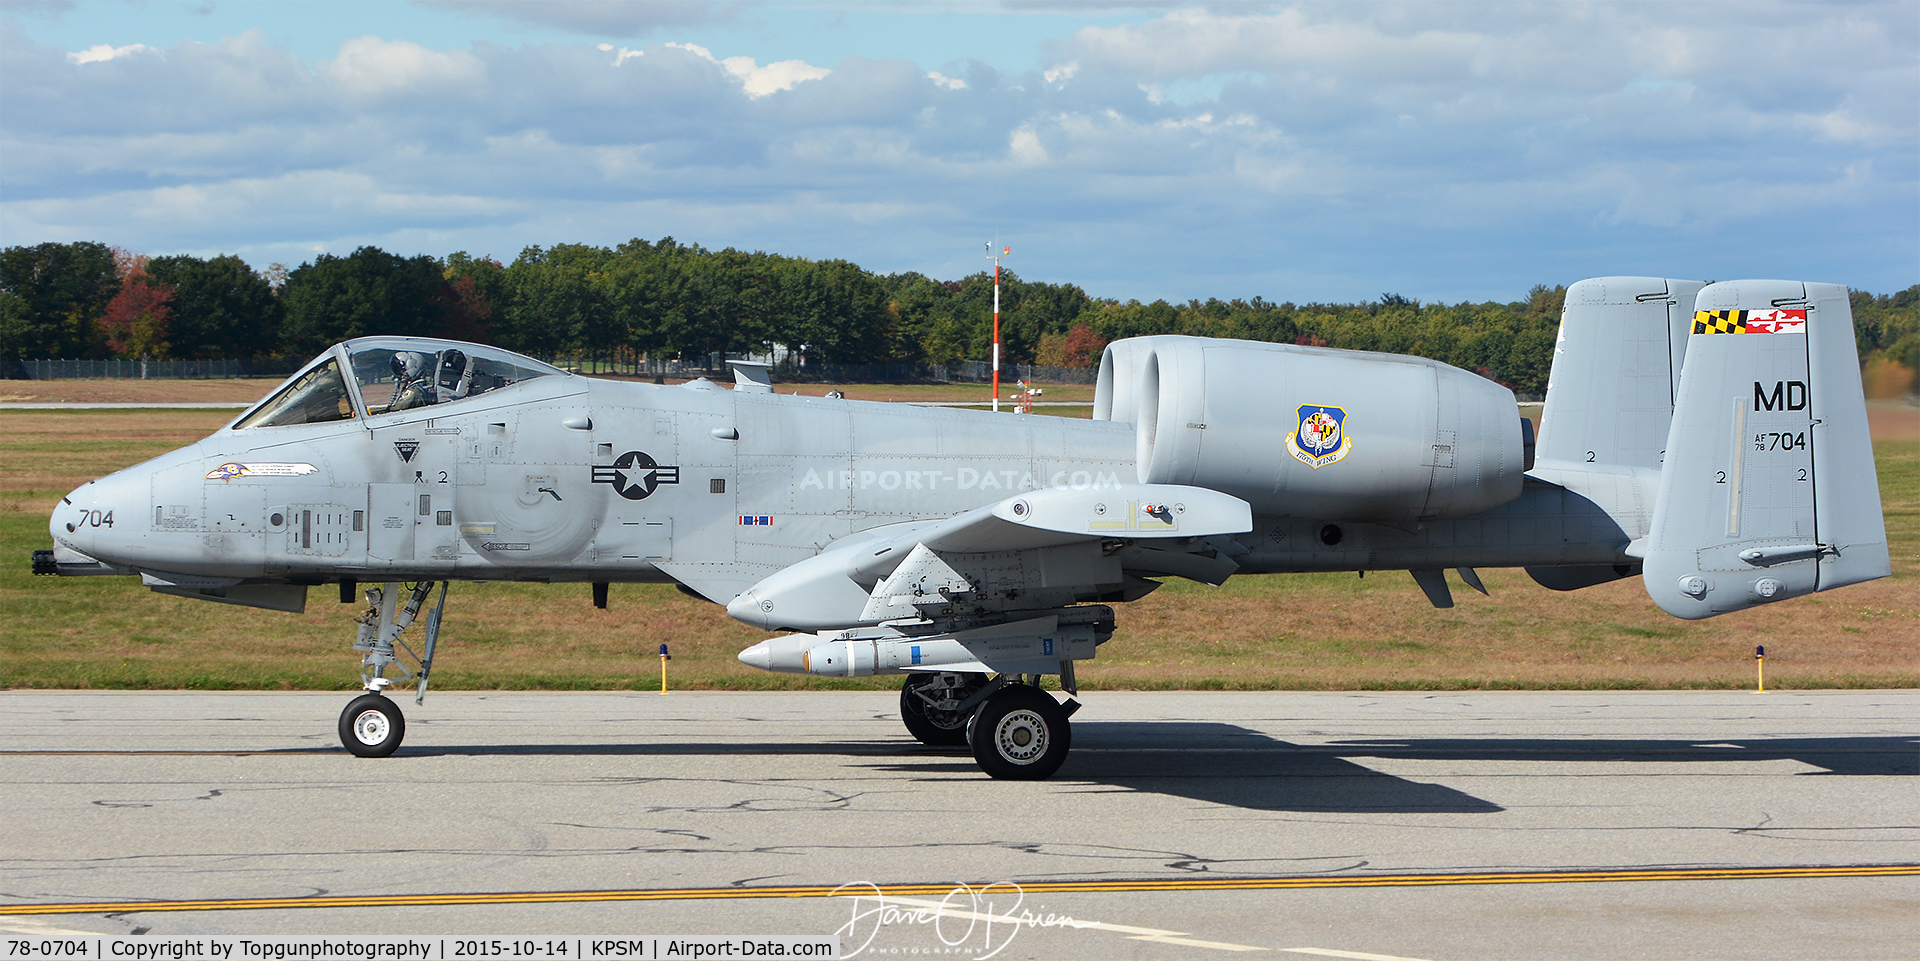 78-0704, 1978 Fairchild Republic A-10C Thunderbolt II C/N A10-0324, RAVEN1 Flight Lead taxing to RW34
104th FS working CAS out of Pease